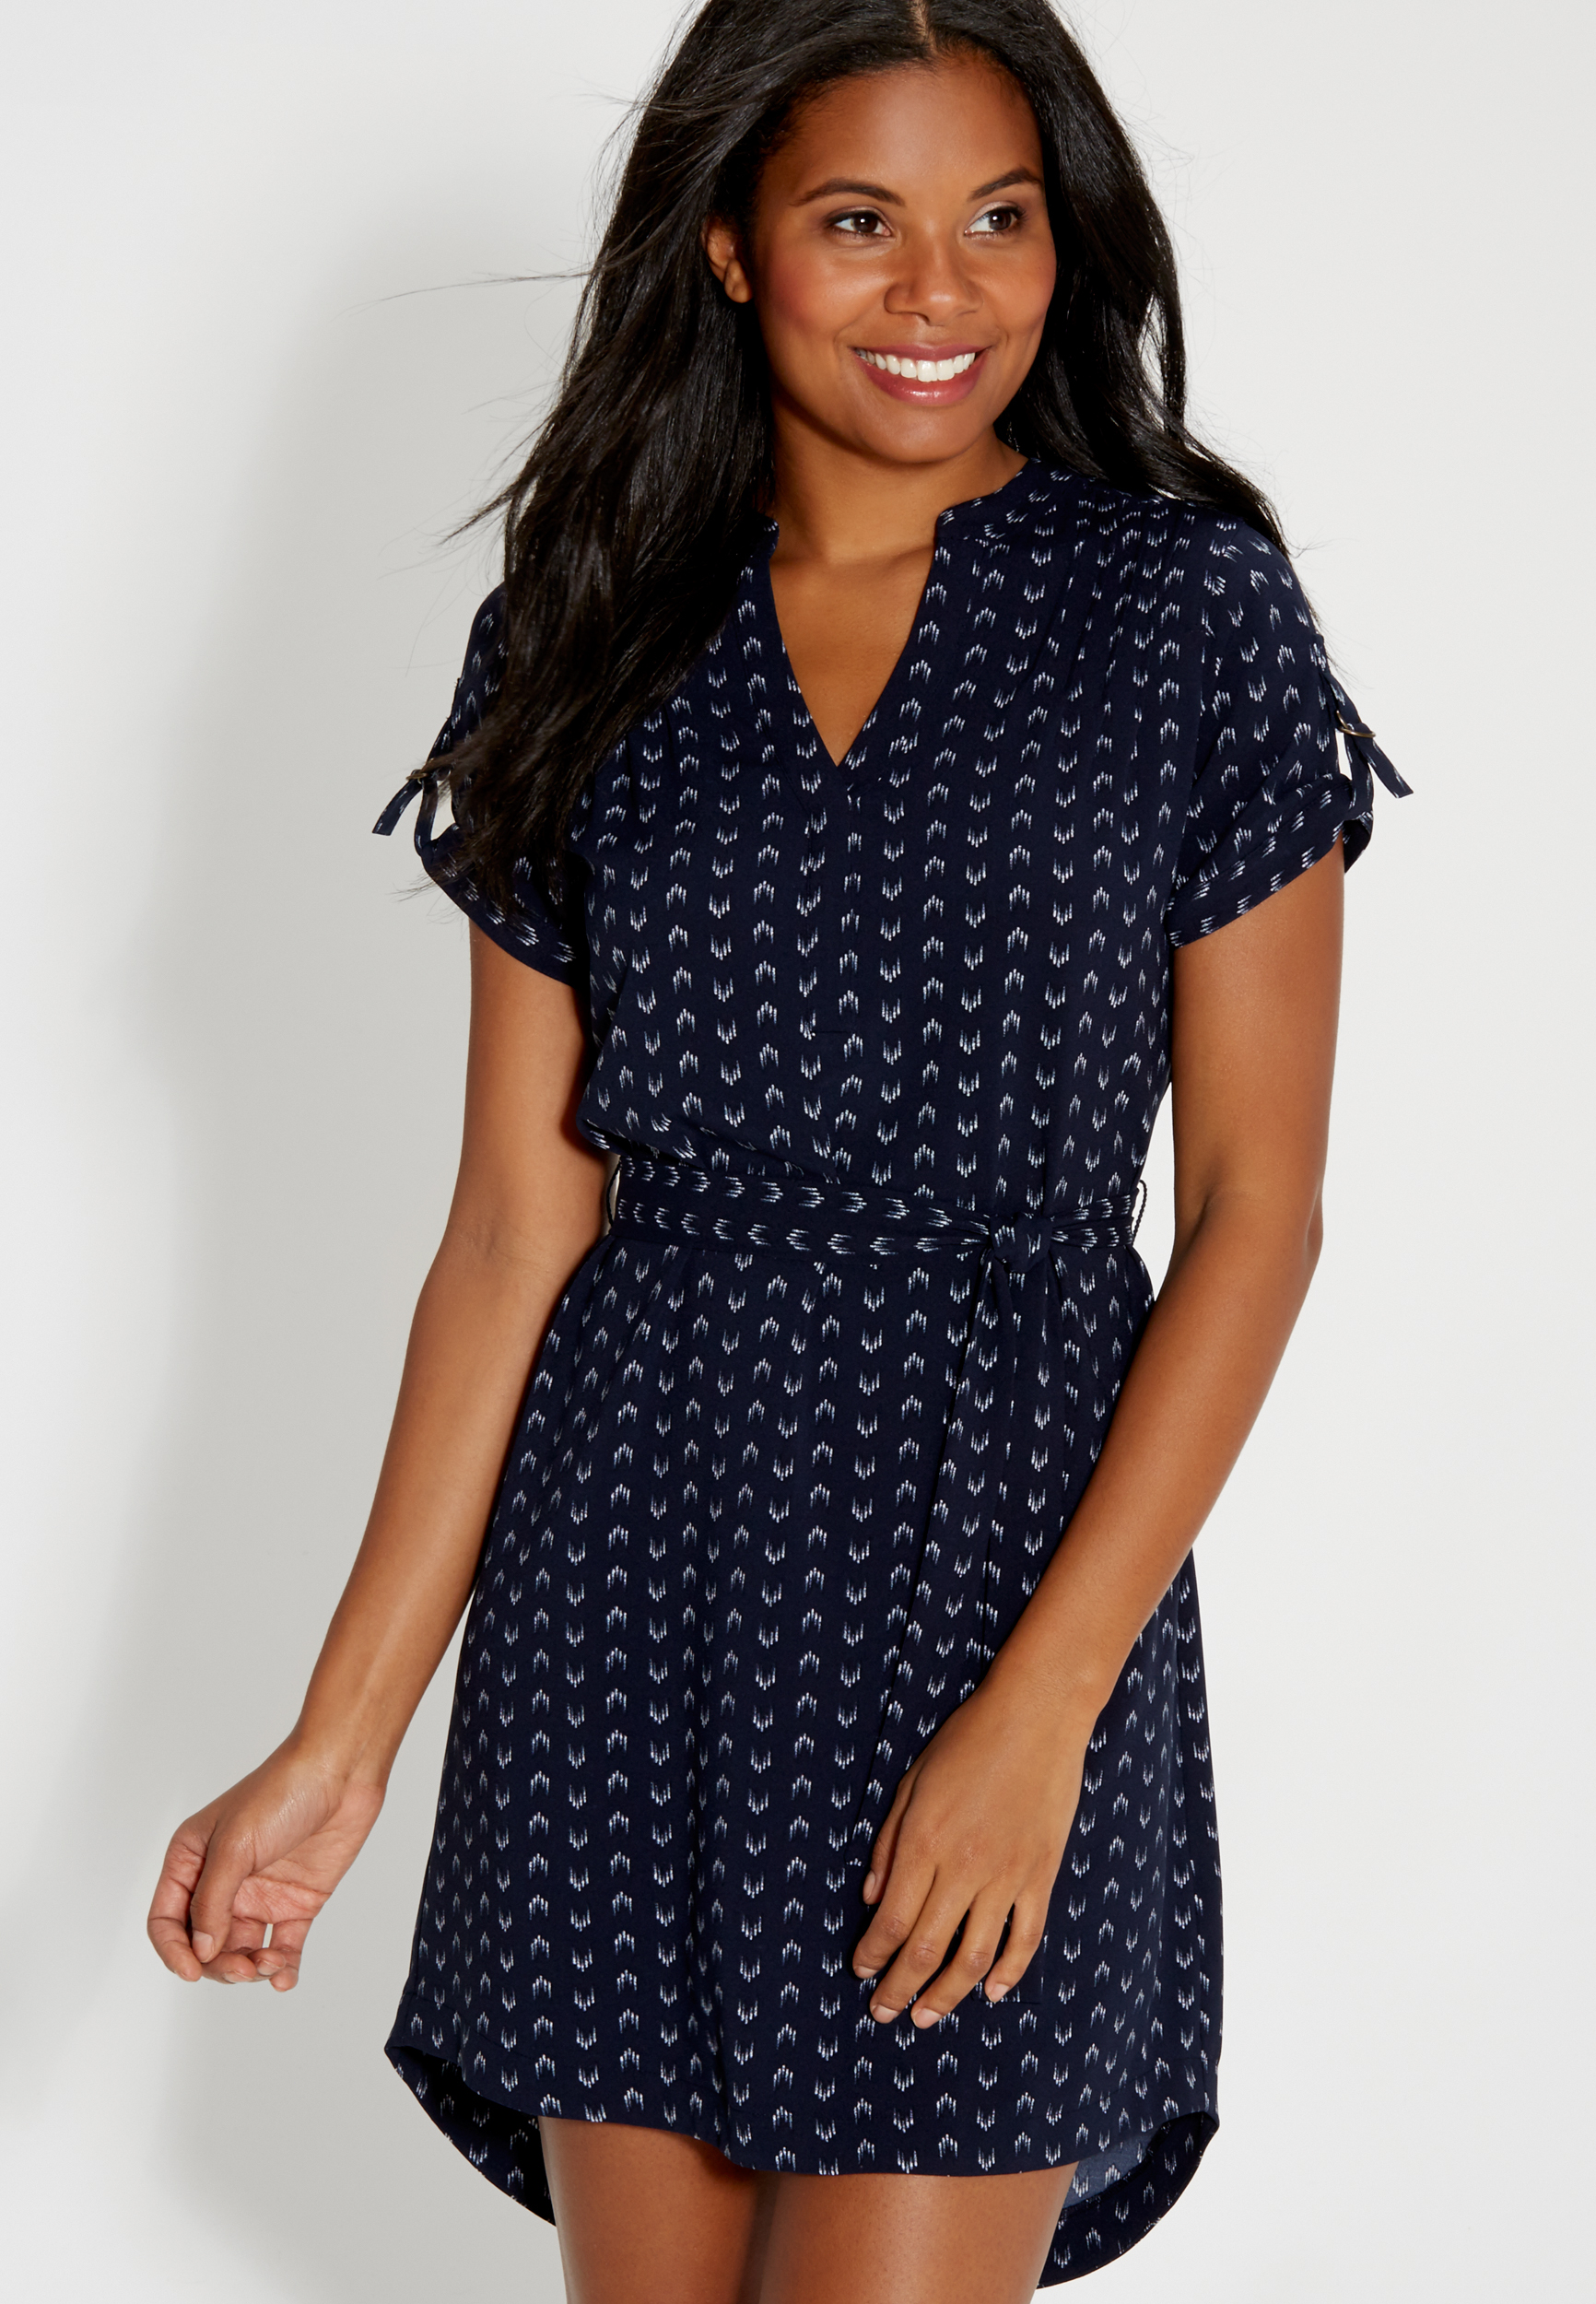 shirtdress in ethnic print with tie waist | maurices